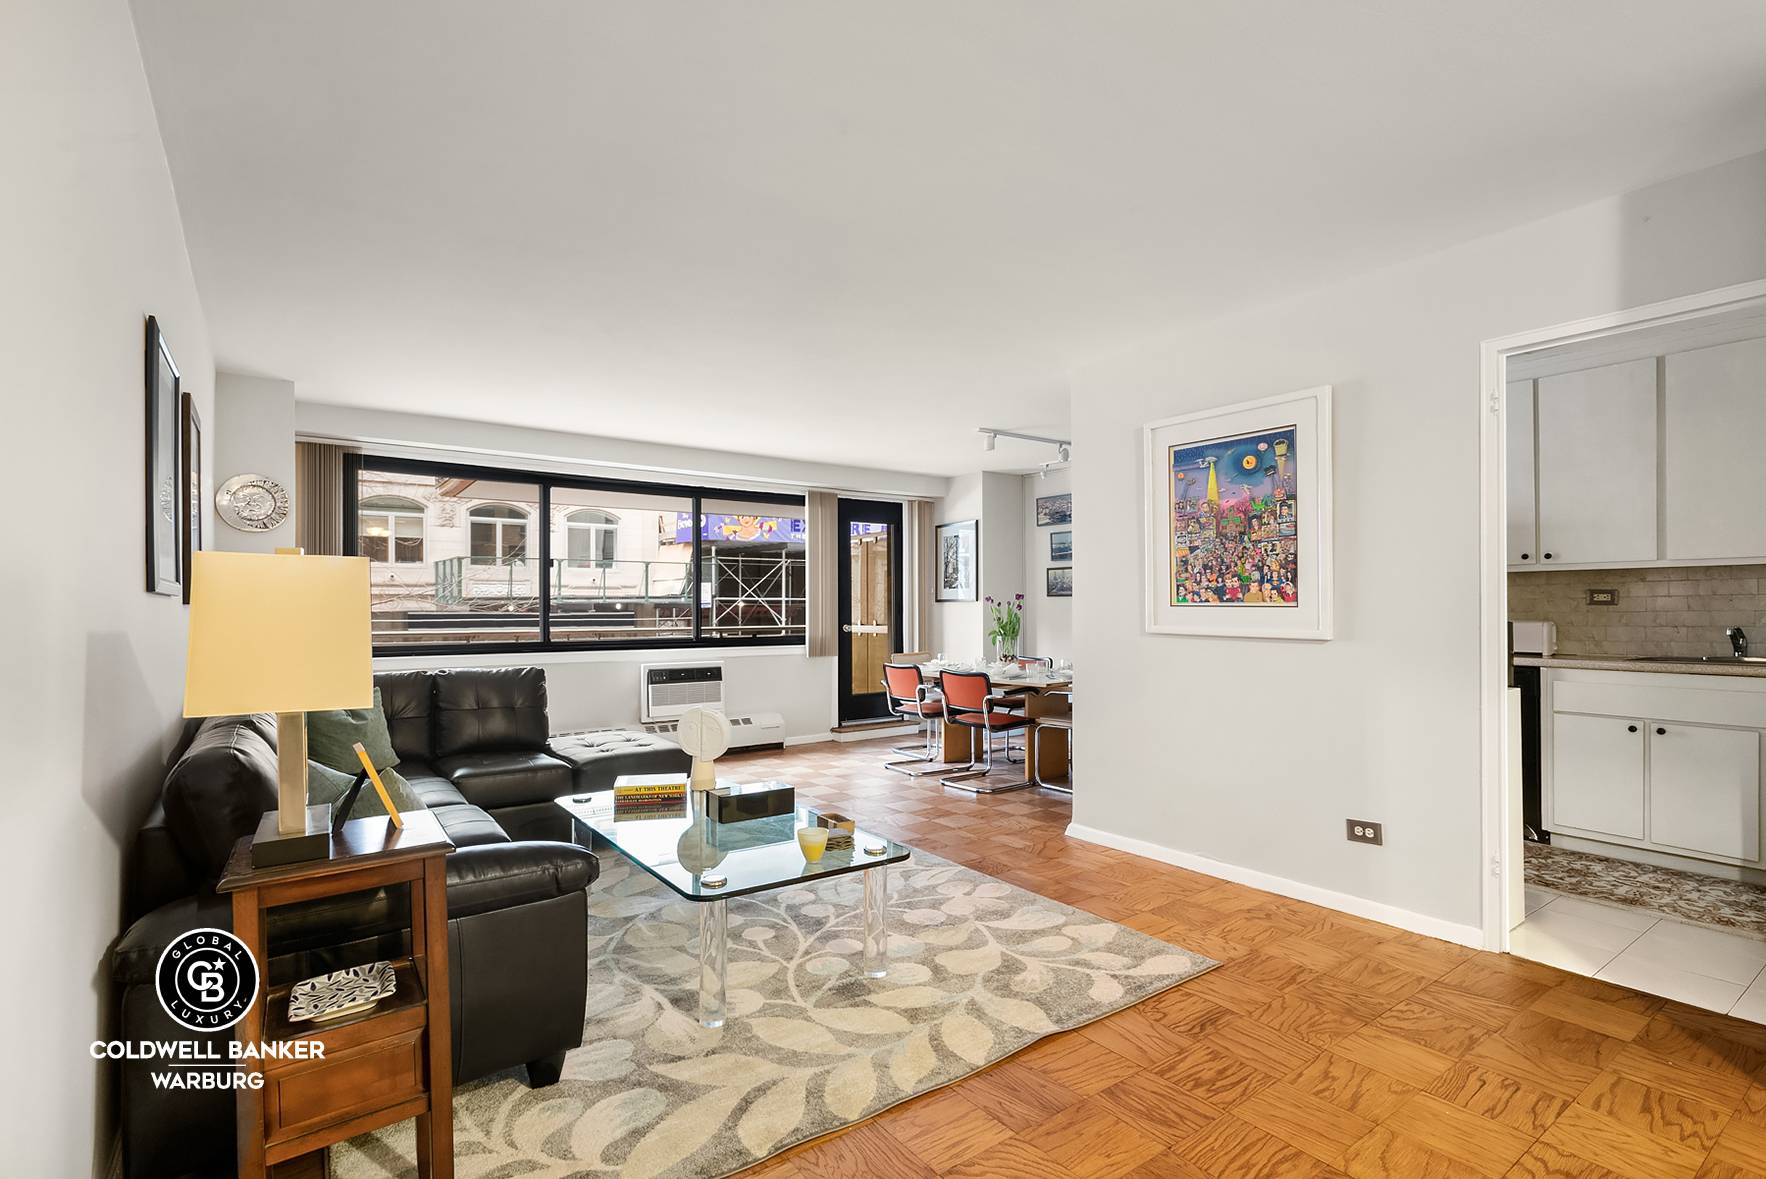 Welcome to 16 West 16th Street, Apartment 2DN, a rarely available large 1 Bedroom, 1 Bath home with a separate dining area and a balcony.